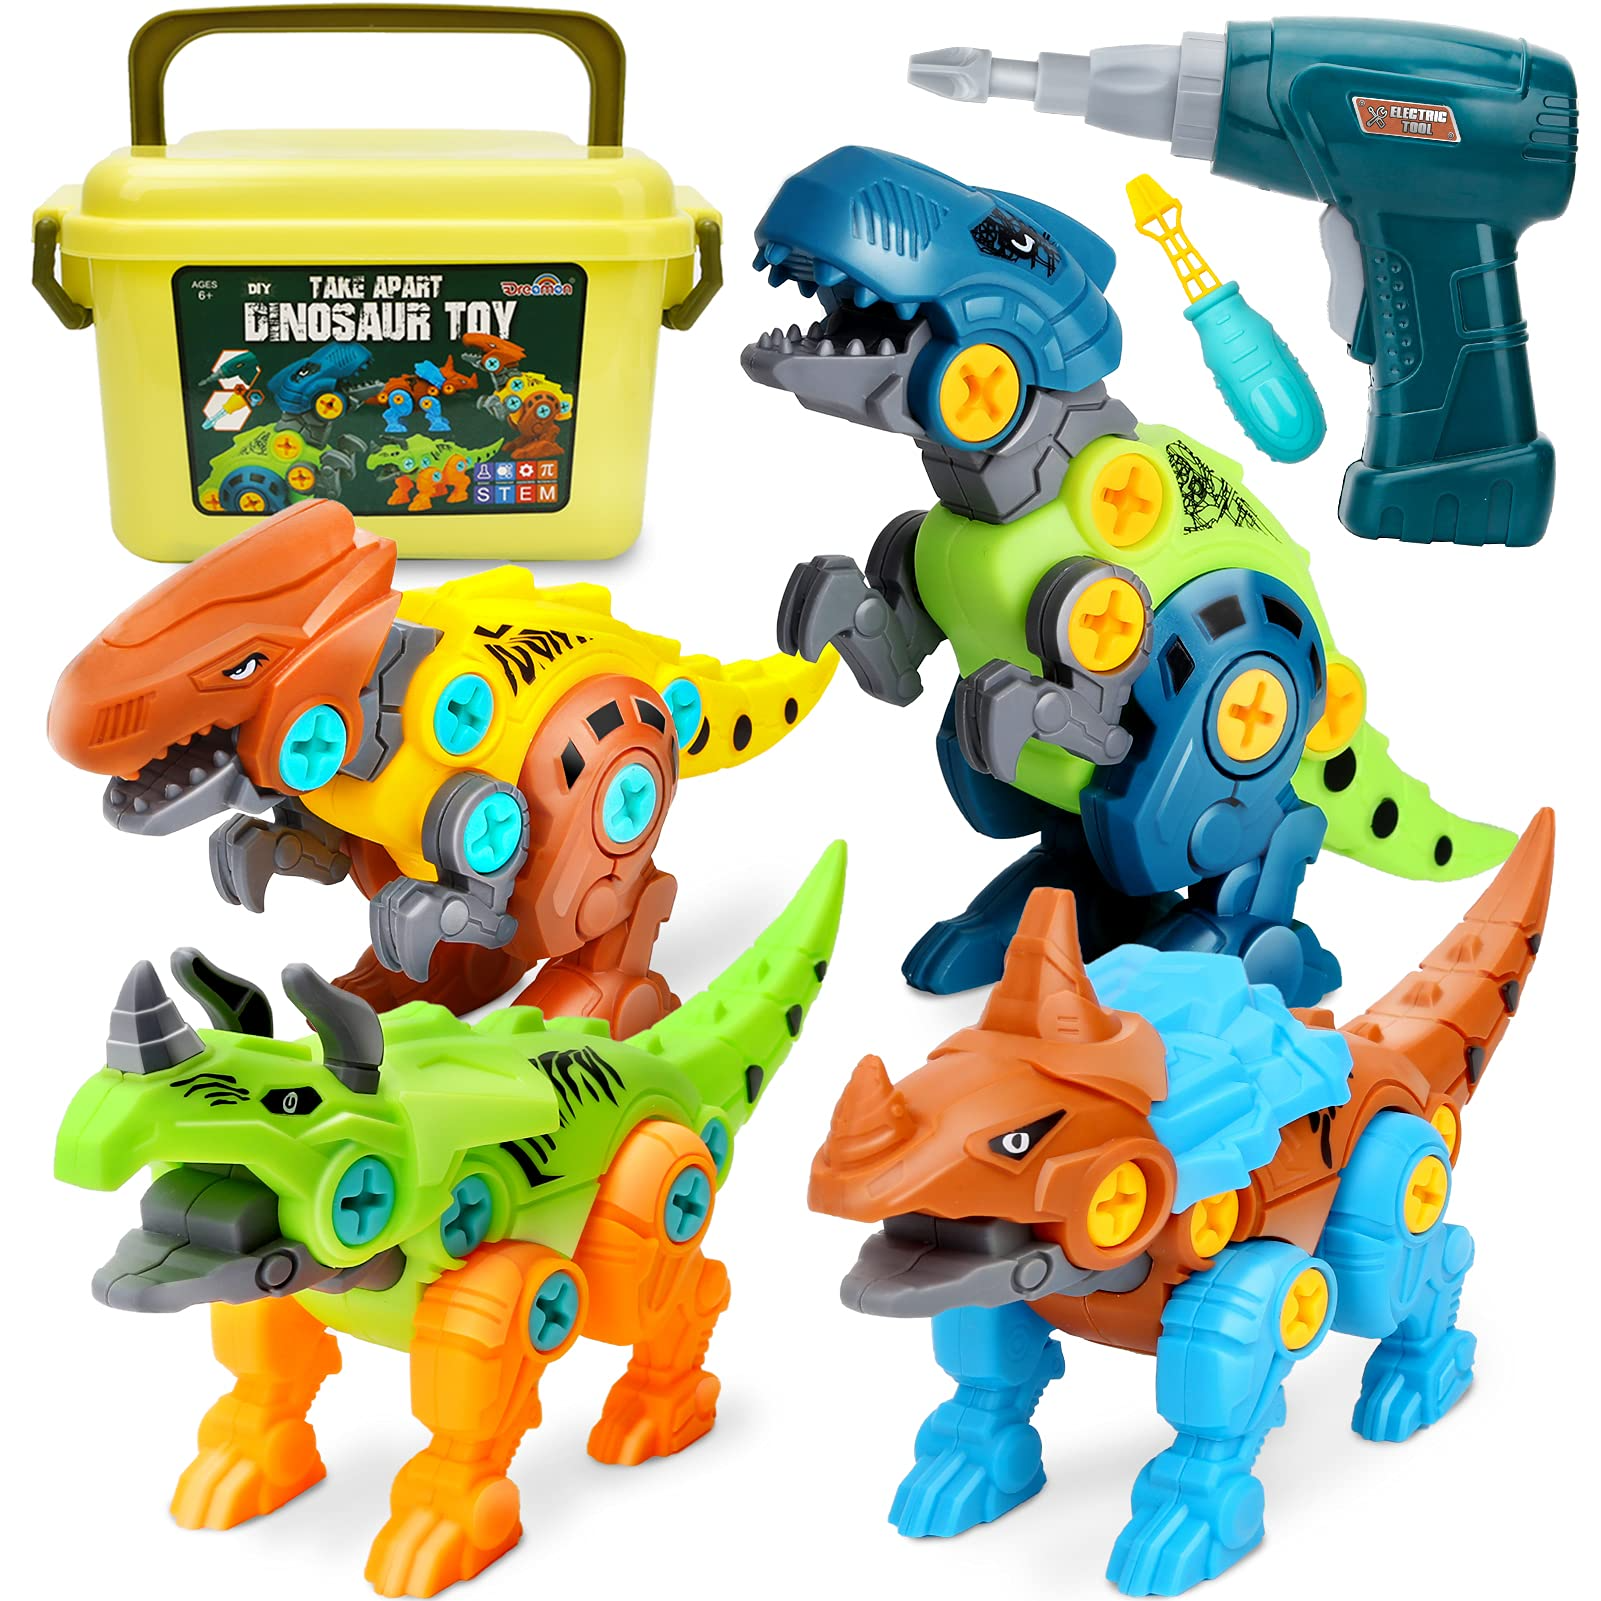 Construction Play Kit Take Apart Toys with Electric Drill VNVDFLM 3 Pcs Take Apart Dinosaur Toys for Kids Age 3 4 5 6 7 L-r3, Red, Green, Brown Building Toy Set Learning Gifts for Boys and Girls